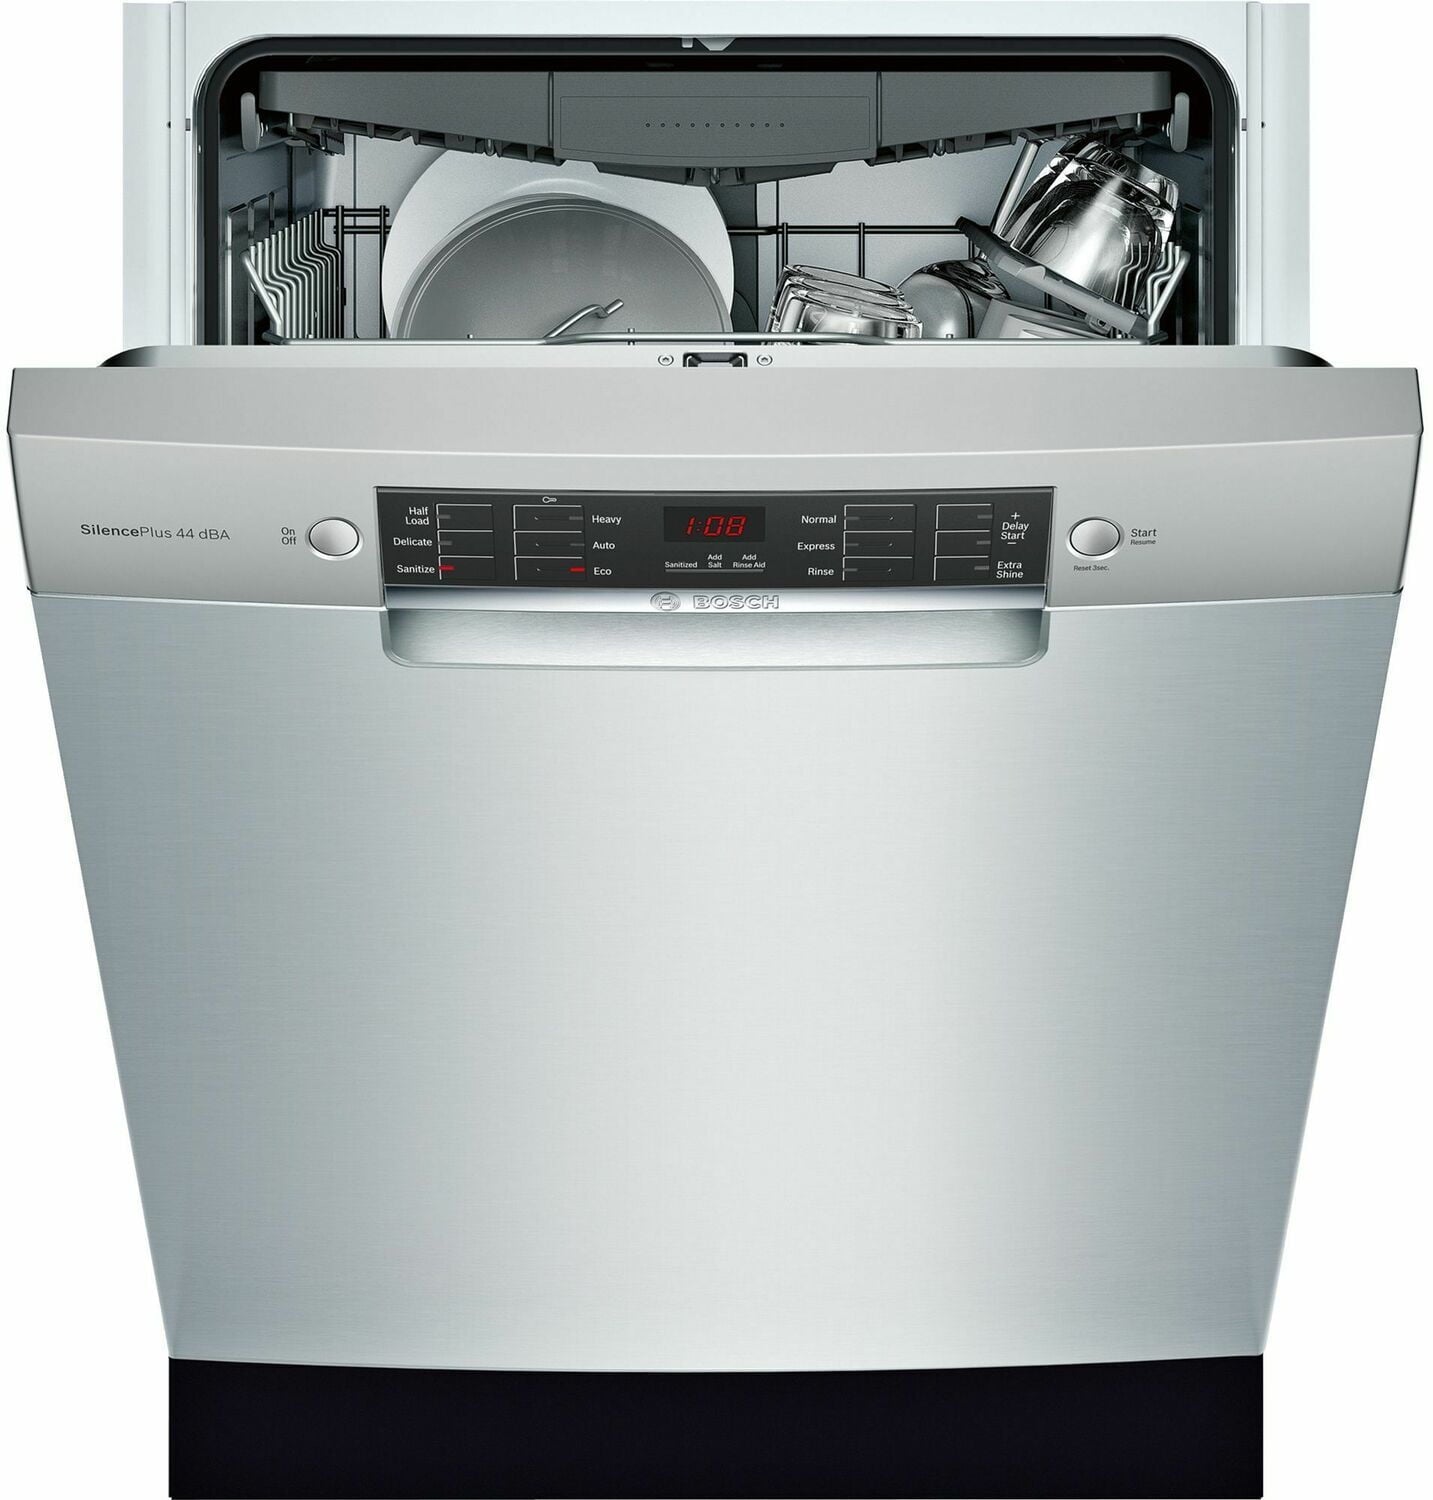 Bosch SGE68X55UC 800 Series Dishwasher 24'' Stainless Steel Sge68X55Uc